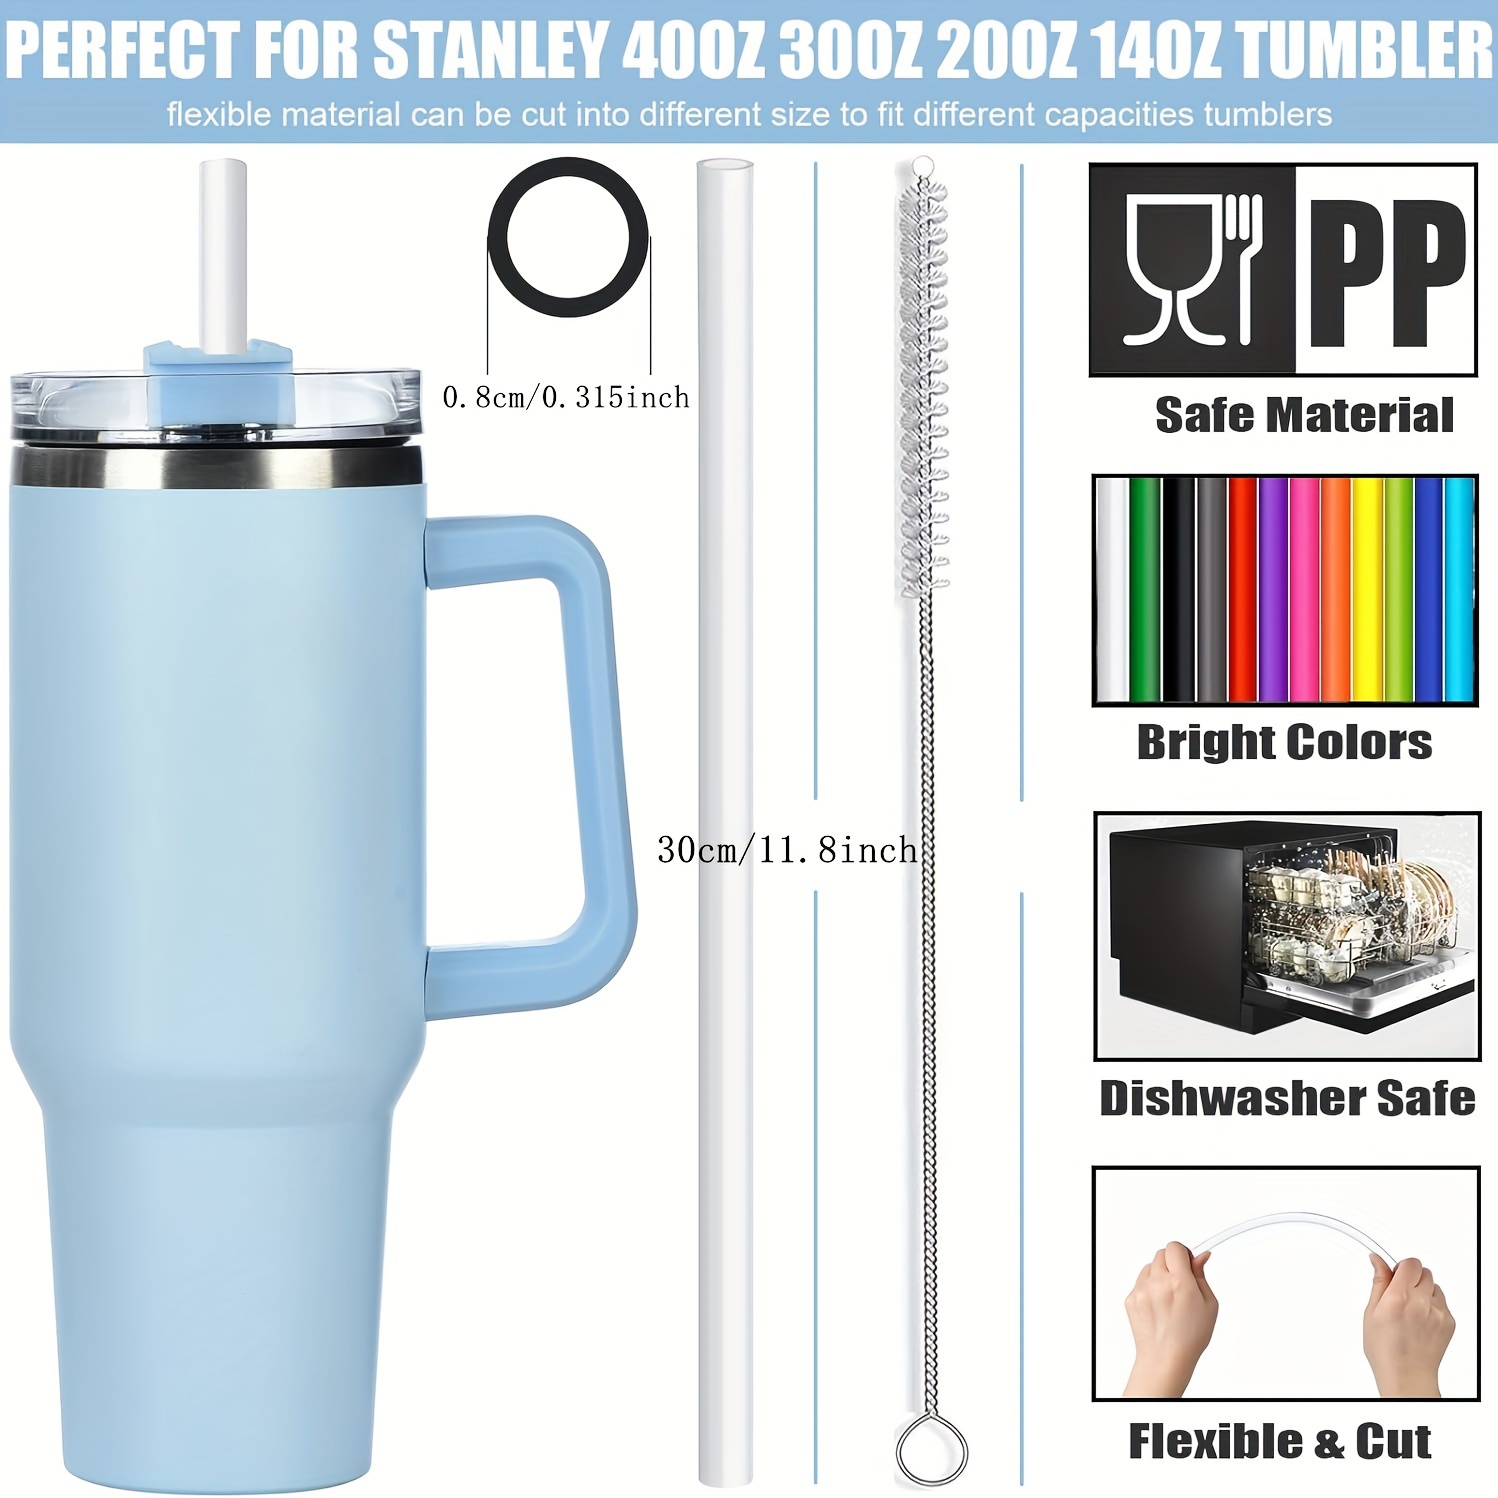 8 Pack Replacement Straws for Stanley 30 40 Oz Adventure Quencher